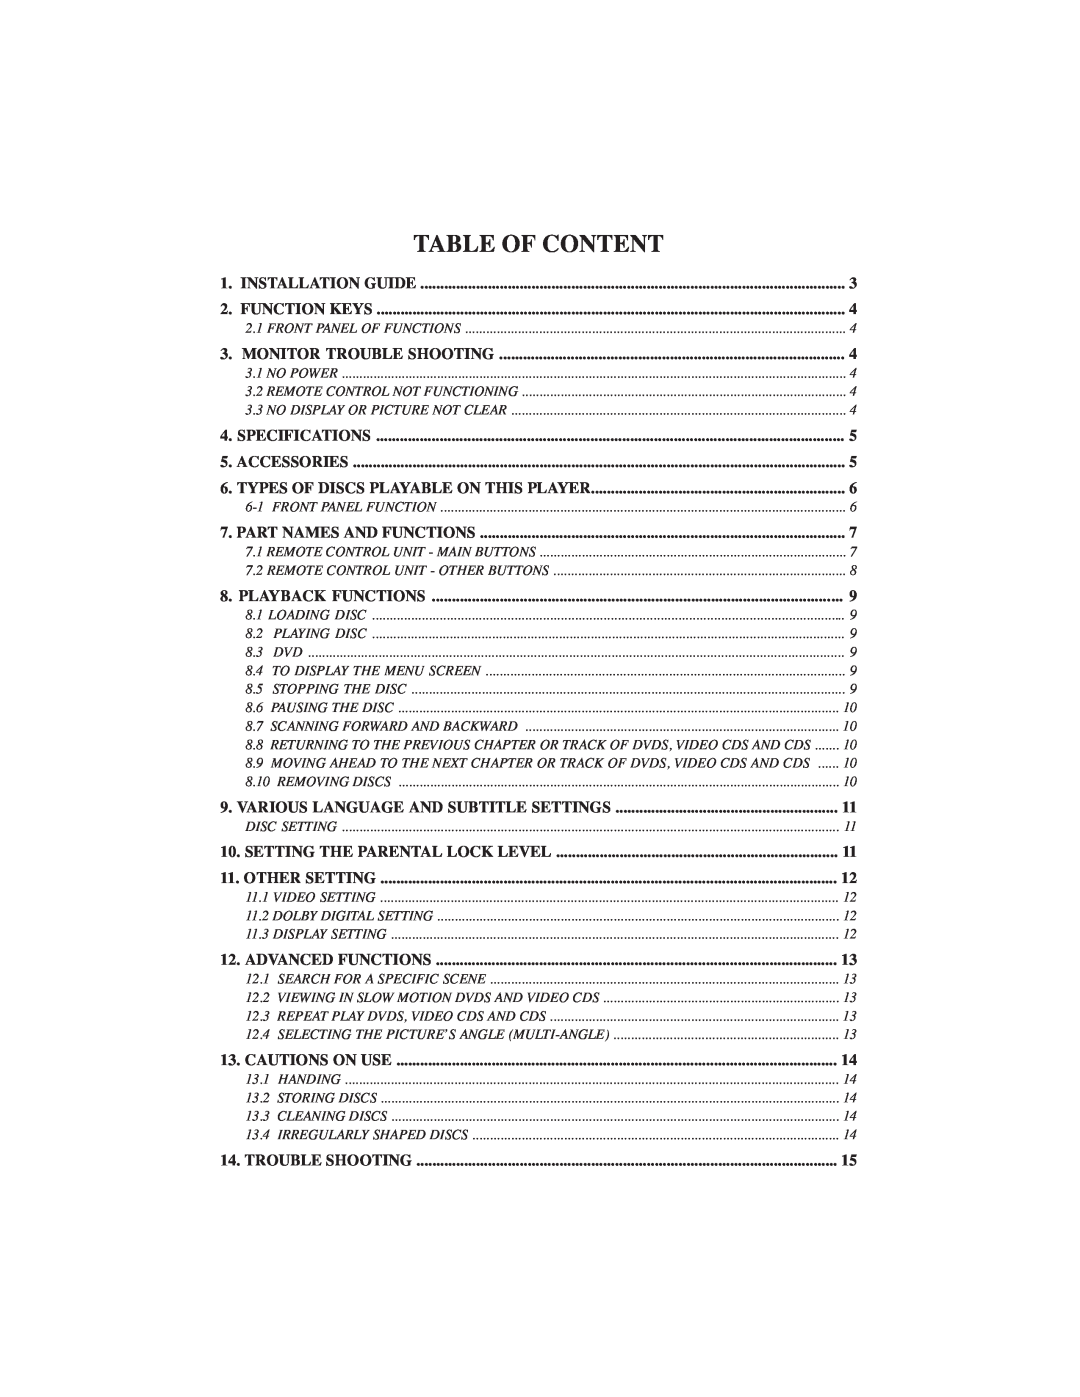 PYLE Audio DVD manual Table Of Content, Trouble Shooting 